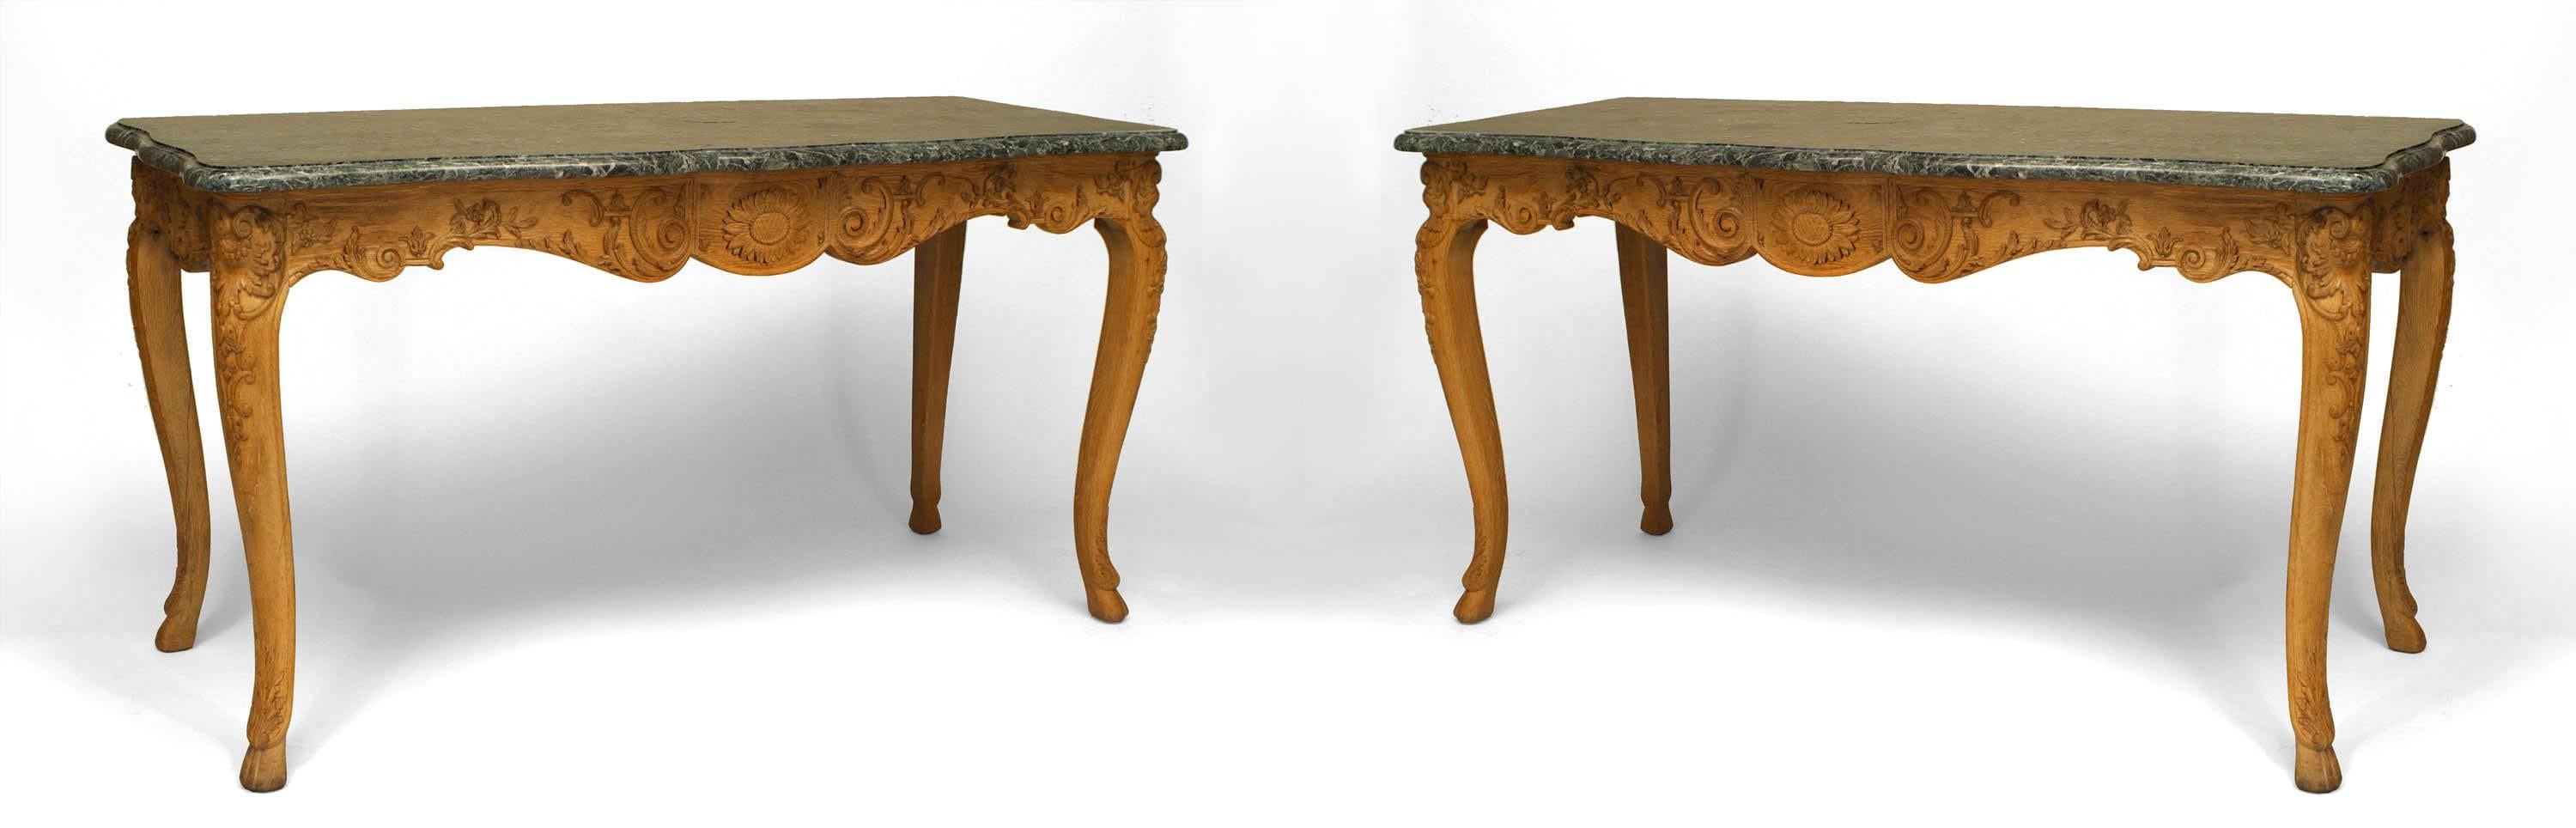 Pair of French Provincial Louis XV-style (19th Century) stripped oak console tables with serpentine green marble top above a sunflower carved apron on cabriole legs with hoof feet (priced as pair).   
  